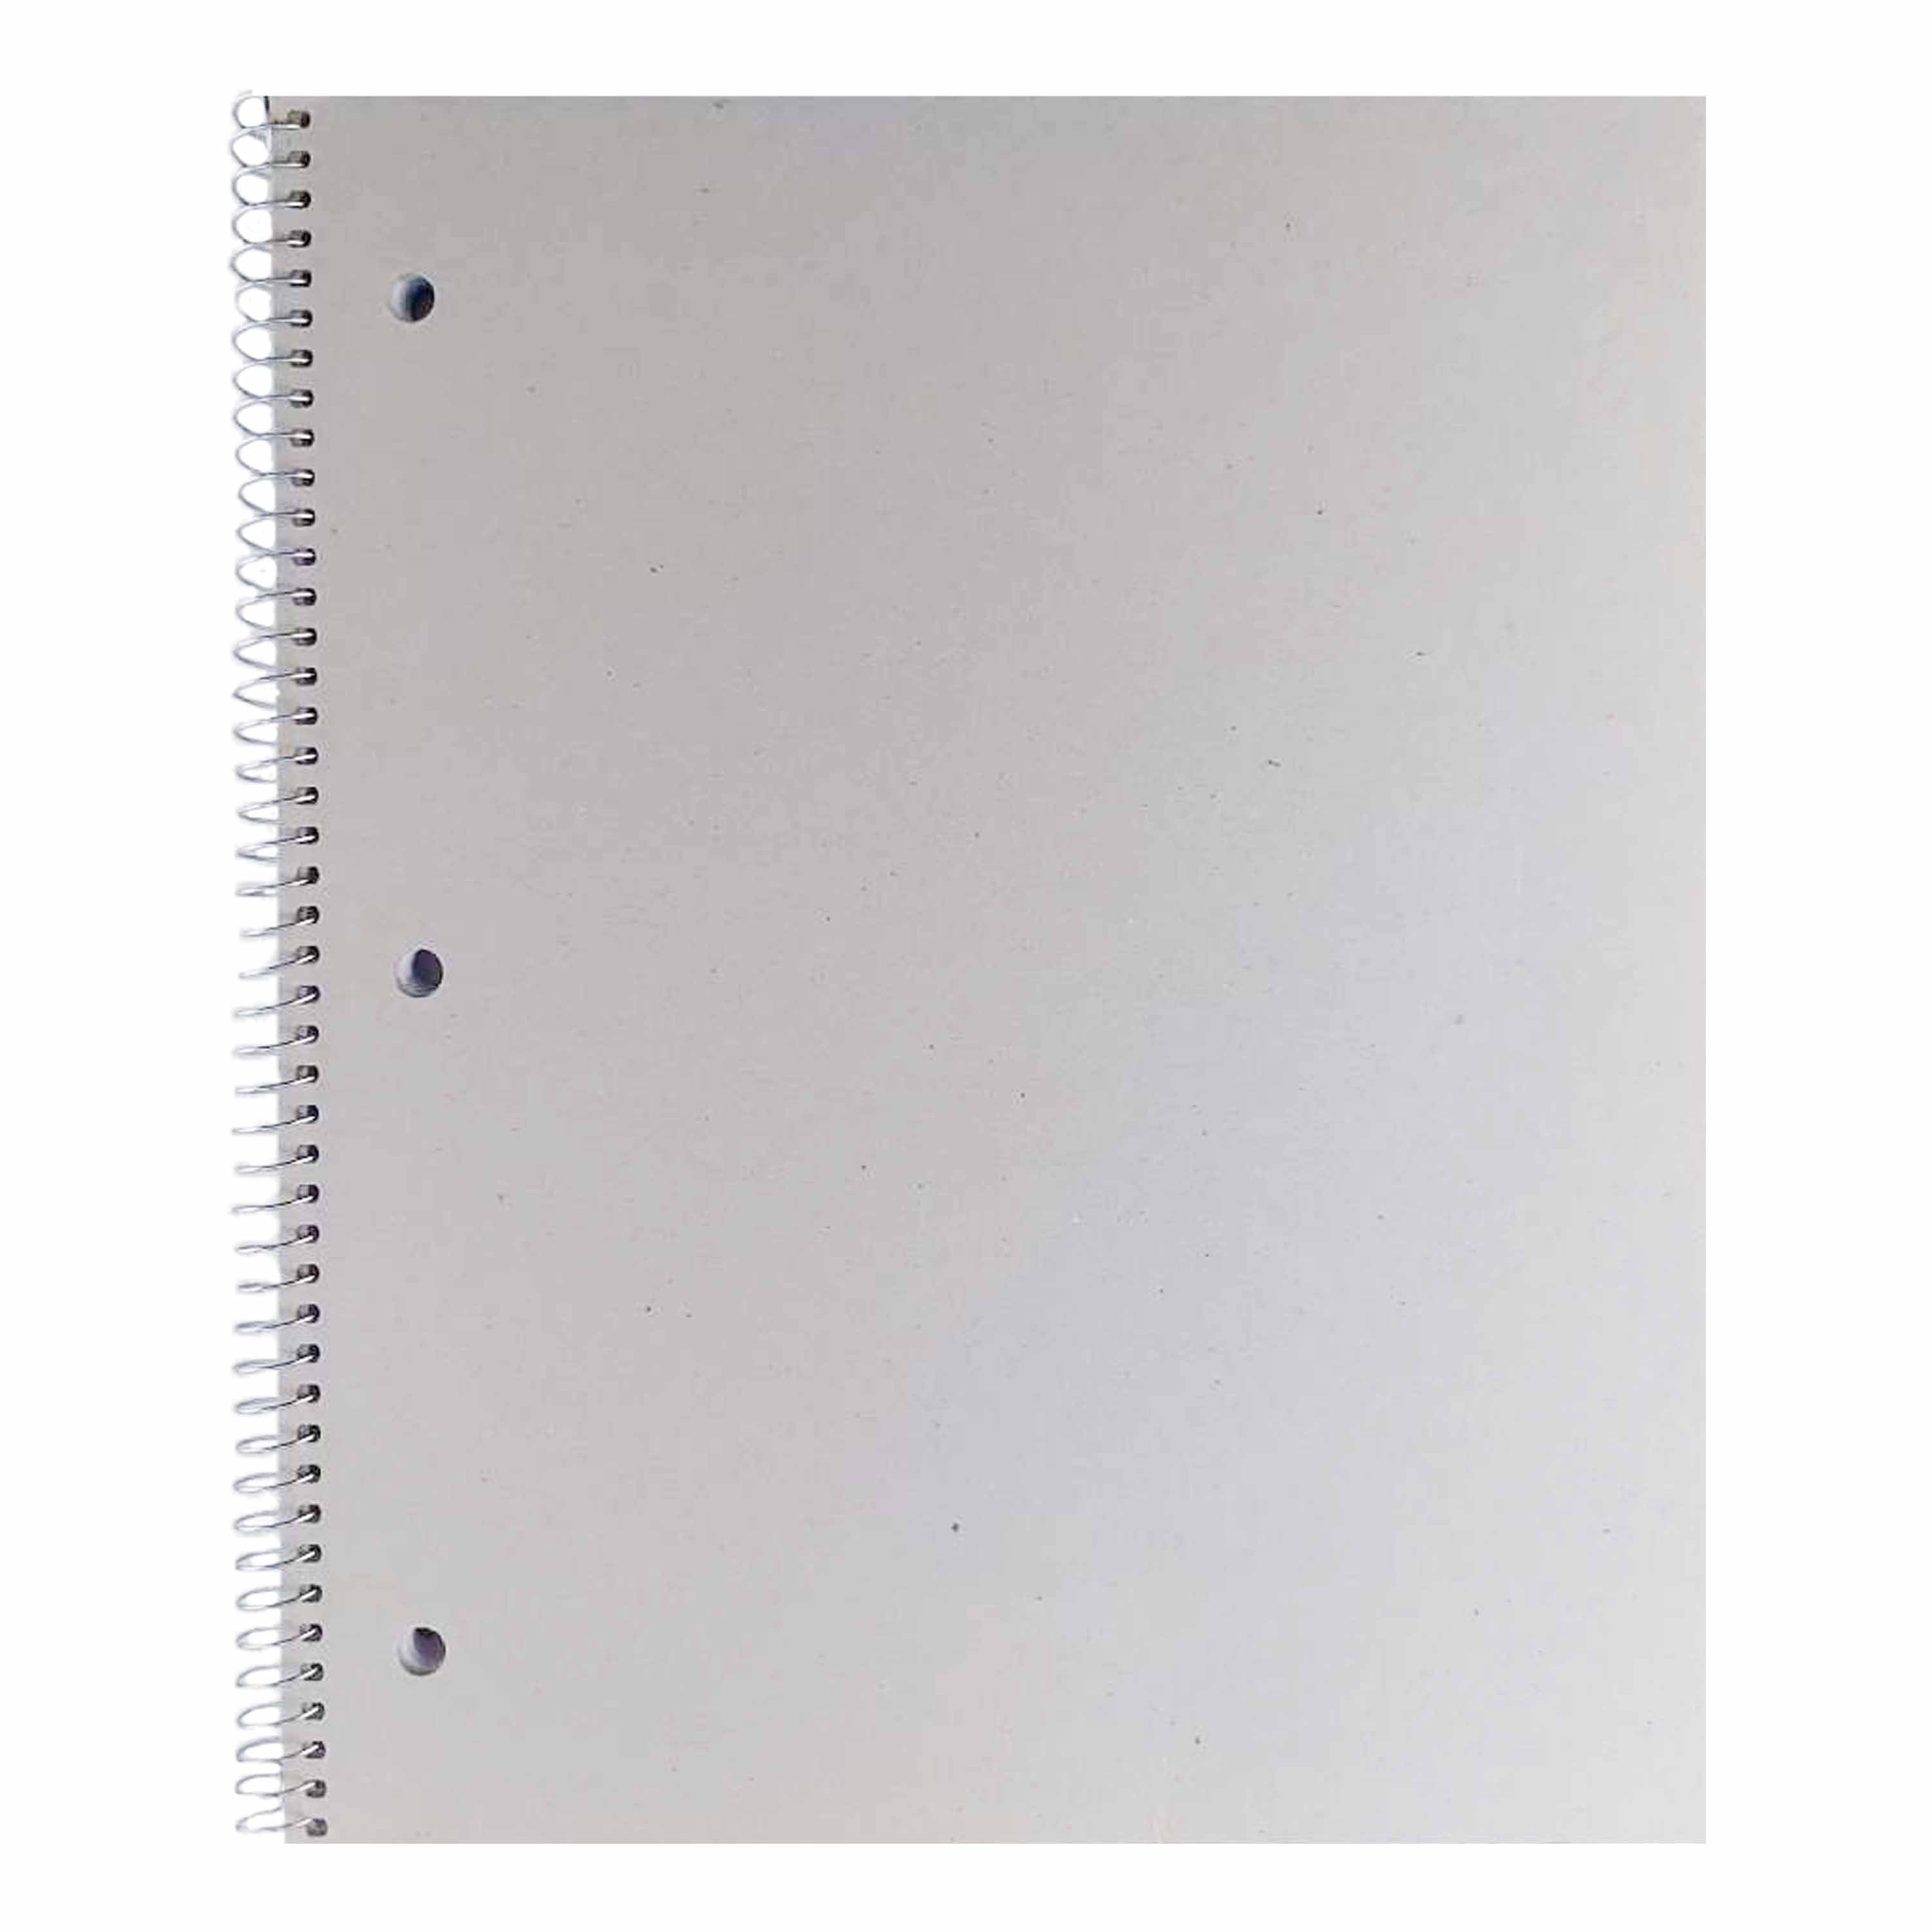 Saint Paul: 6X9 College Ruled Notebook To Write In With Skyline Of